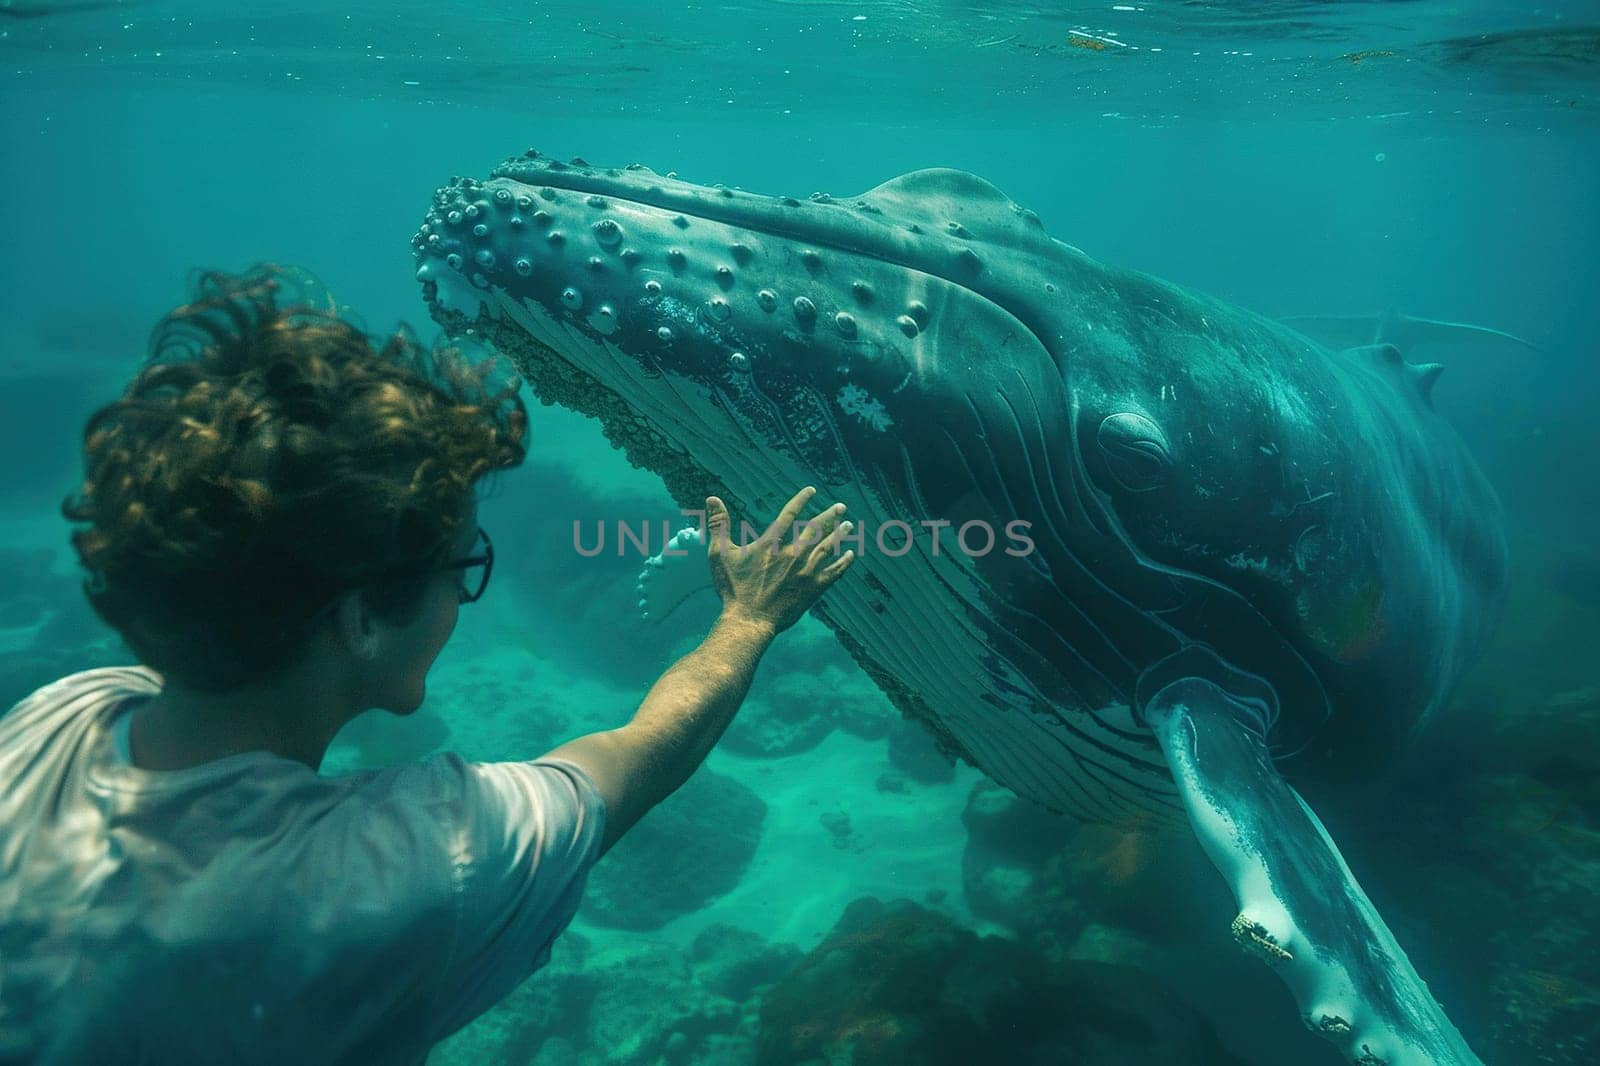 Man and whale underwater. Whale protection concept.